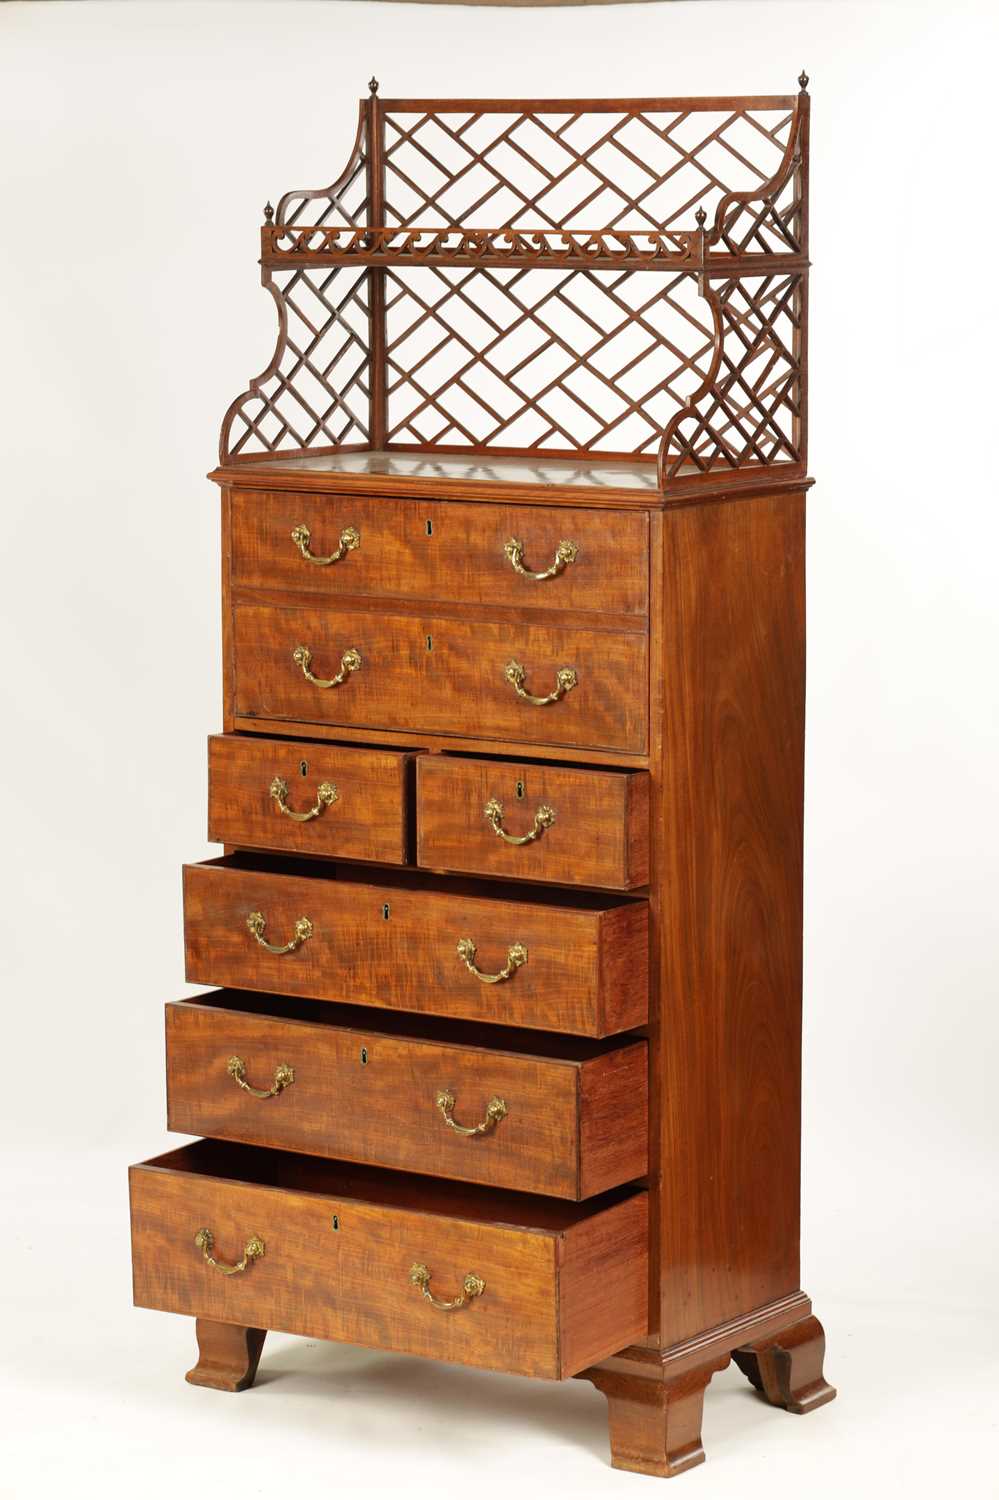 A RARE GEORGE III MAHOGANY LIBRARY SECRETAIRE CHEST OF DRAWERS WITH DETACHABLE BOOK CARRIER - Image 4 of 16